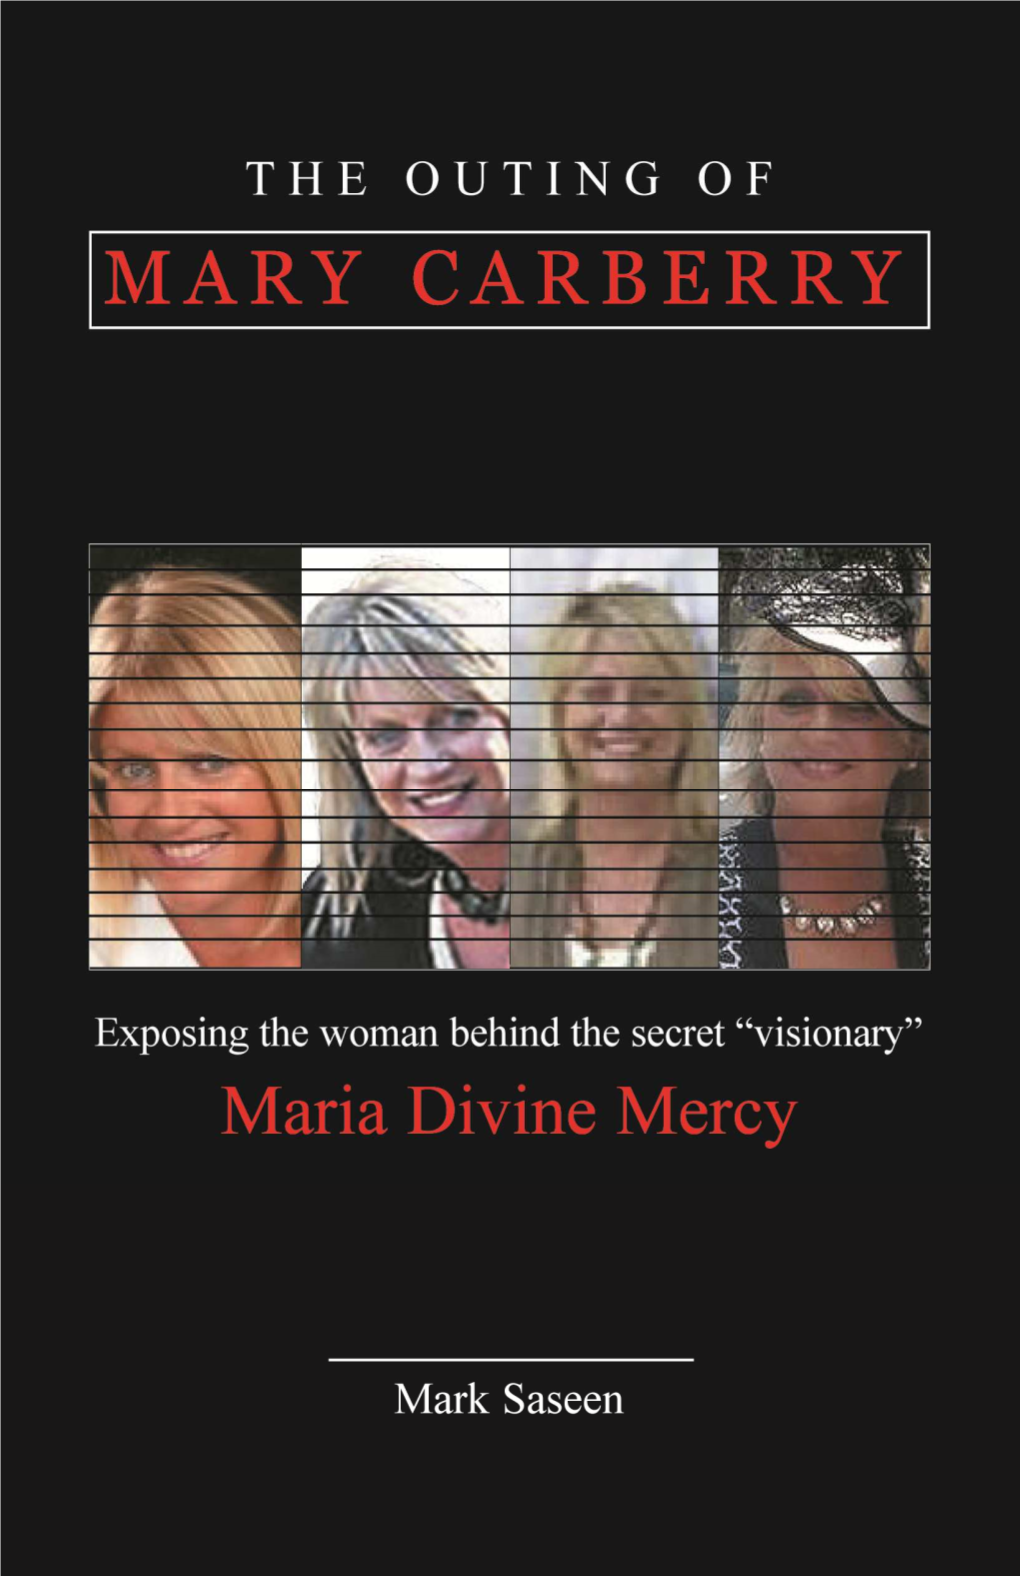 The Outing of Mary Carberry